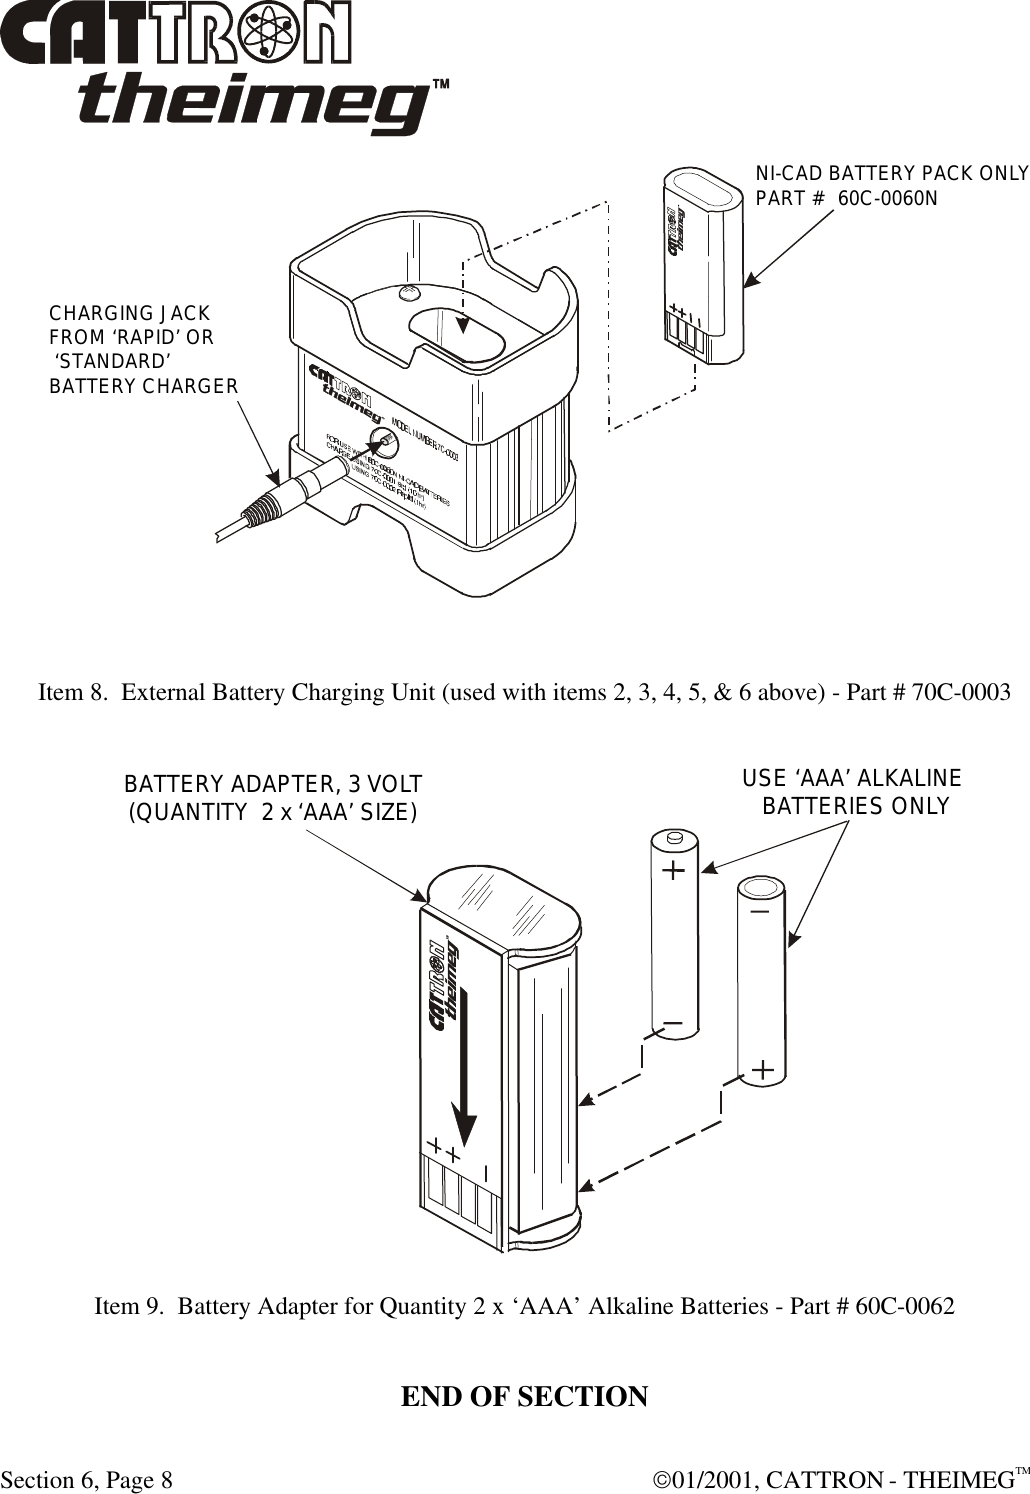  Section 6, Page 8  01/2001, CATTRON - THEIMEGTM   Item 8.  External Battery Charging Unit (used with items 2, 3, 4, 5, &amp; 6 above) - Part # 70C-0003   Item 9.  Battery Adapter for Quantity 2 x ‘AAA’ Alkaline Batteries - Part # 60C-0062  END OF SECTIONCHARGING JACKFROM ‘RAPID’ OR ‘STANDARD’BATTERY CHARGERNI-CAD BATTERY PACK ONLYPART #  60C-0060NUSE ‘AAA’ ALKALINE BATTERIES ONLYBATTERY ADAPTER, 3 VOLT(QUANTITY  2 x ‘AAA’ SIZE) 